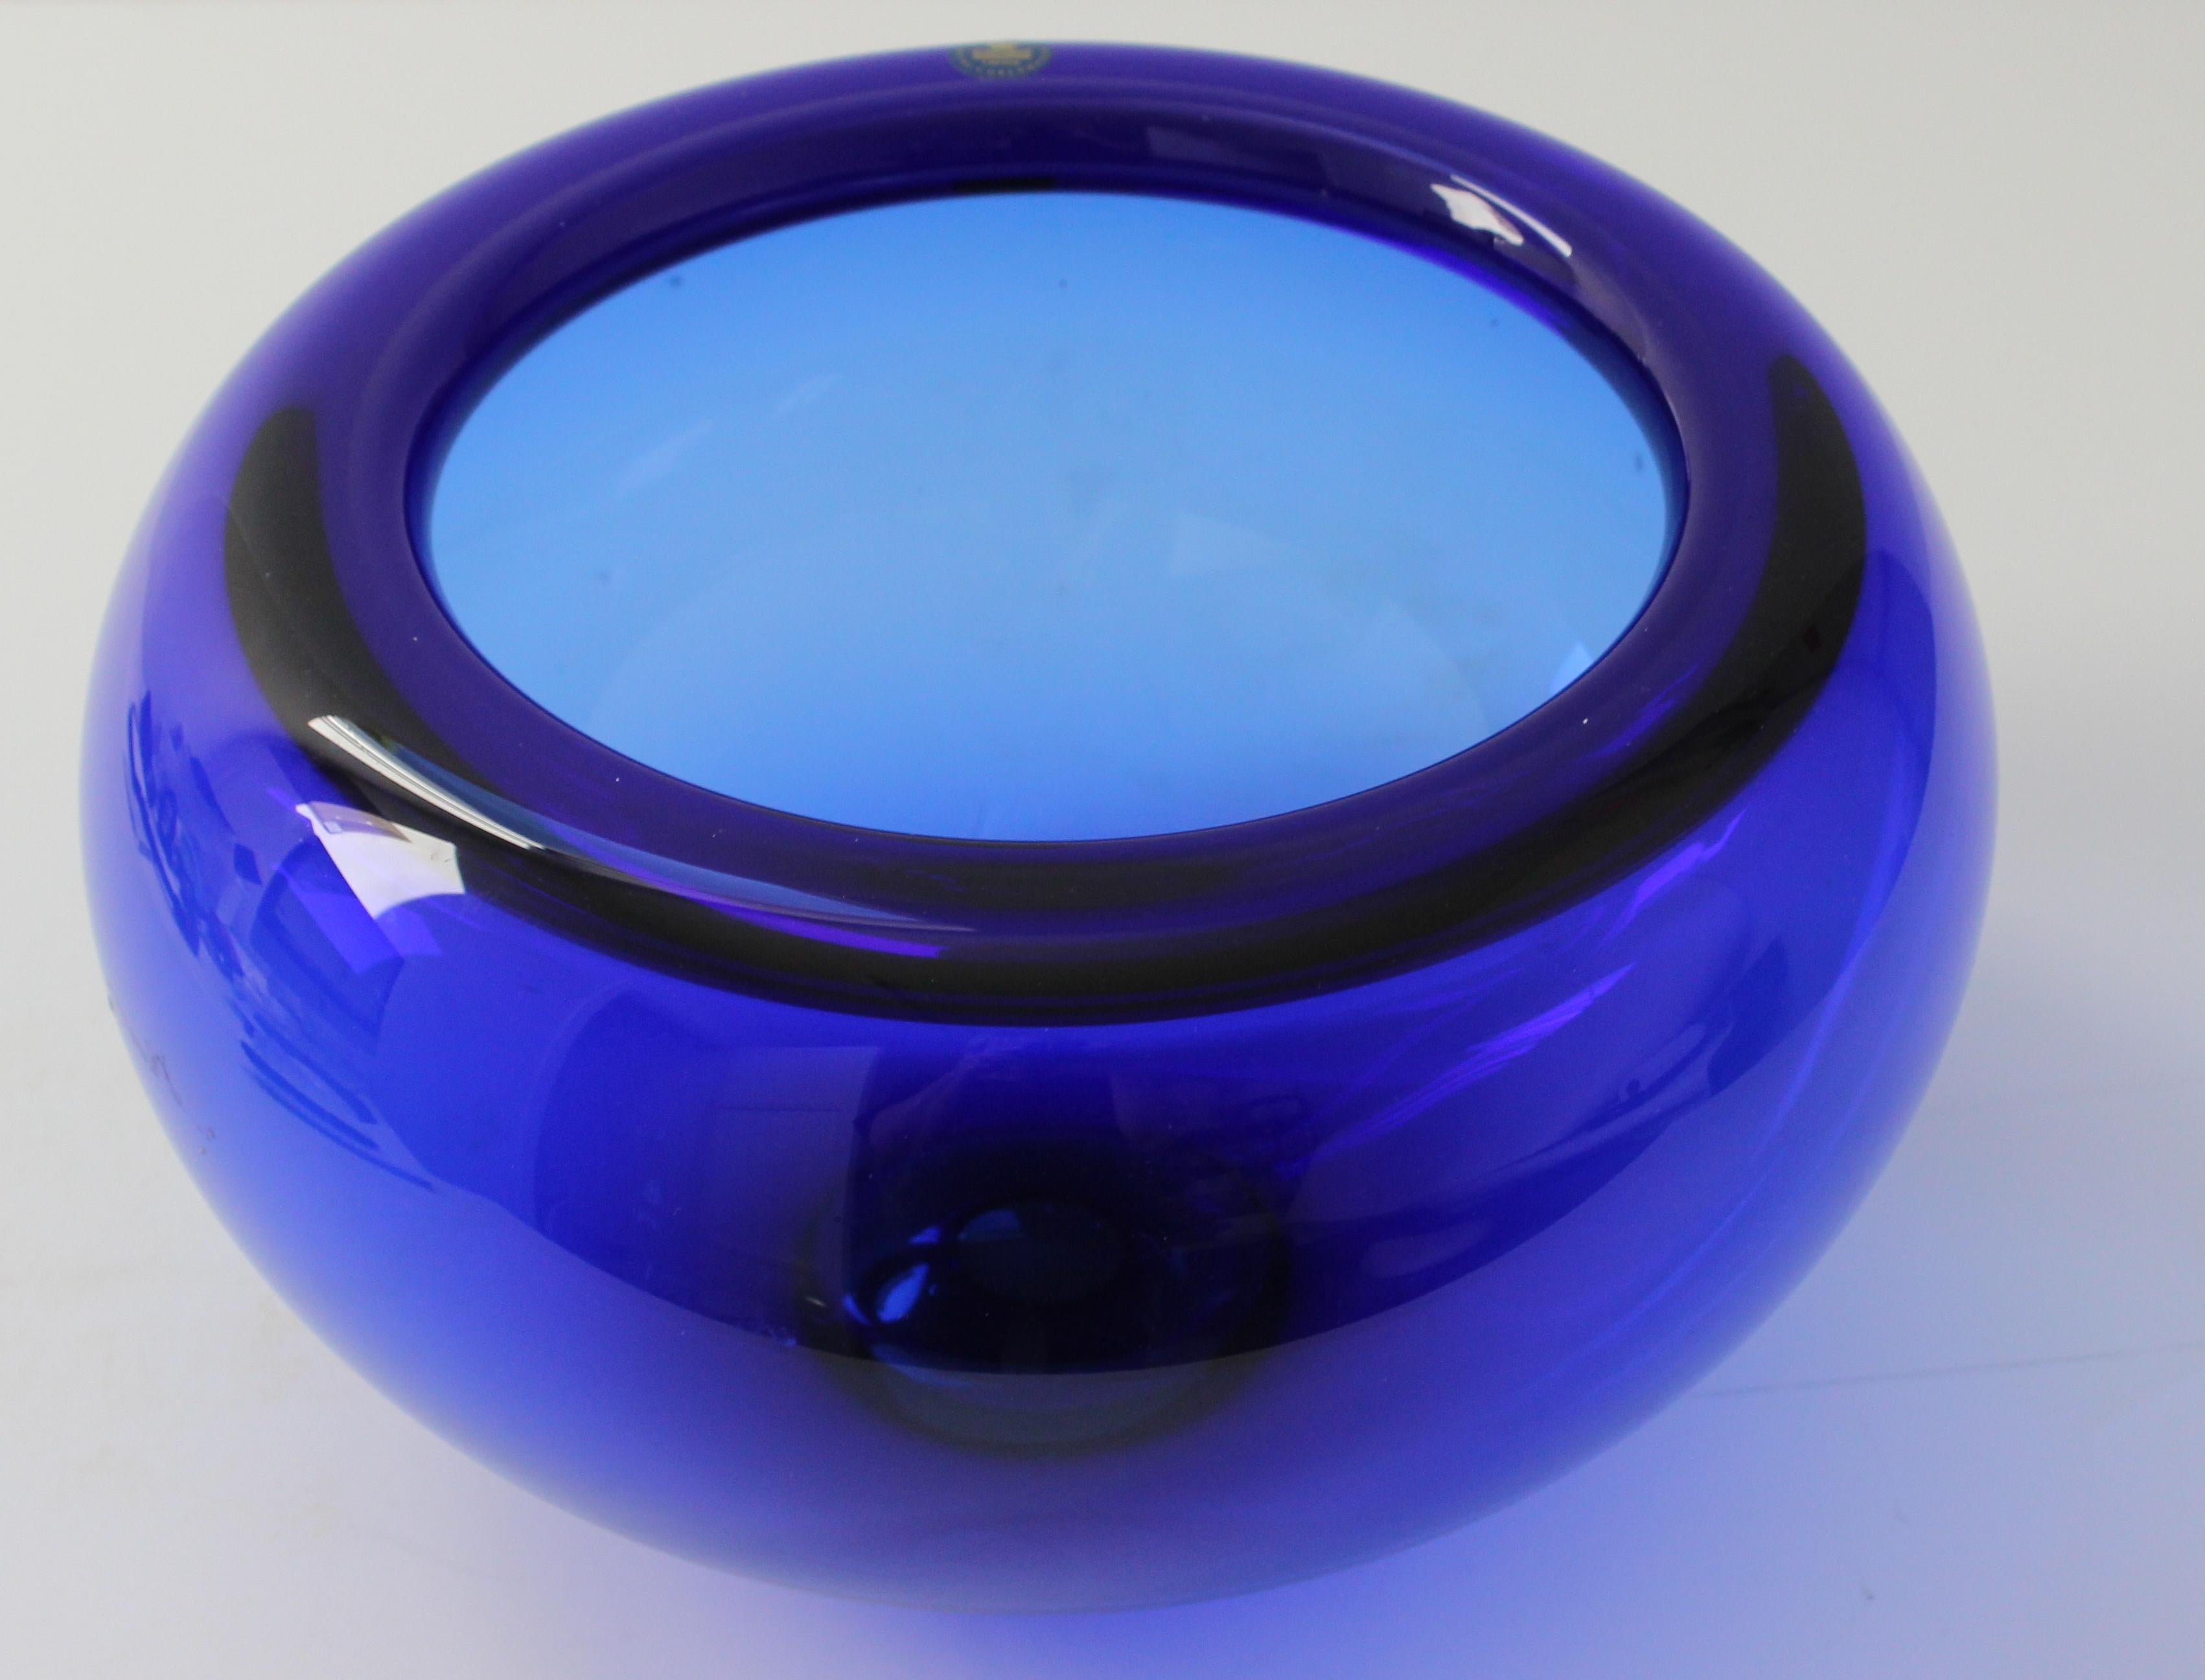 This stylish and classic cobalt blue crystal bowl by Royal Copenhagen dates to the 1970s and it retains its original label.